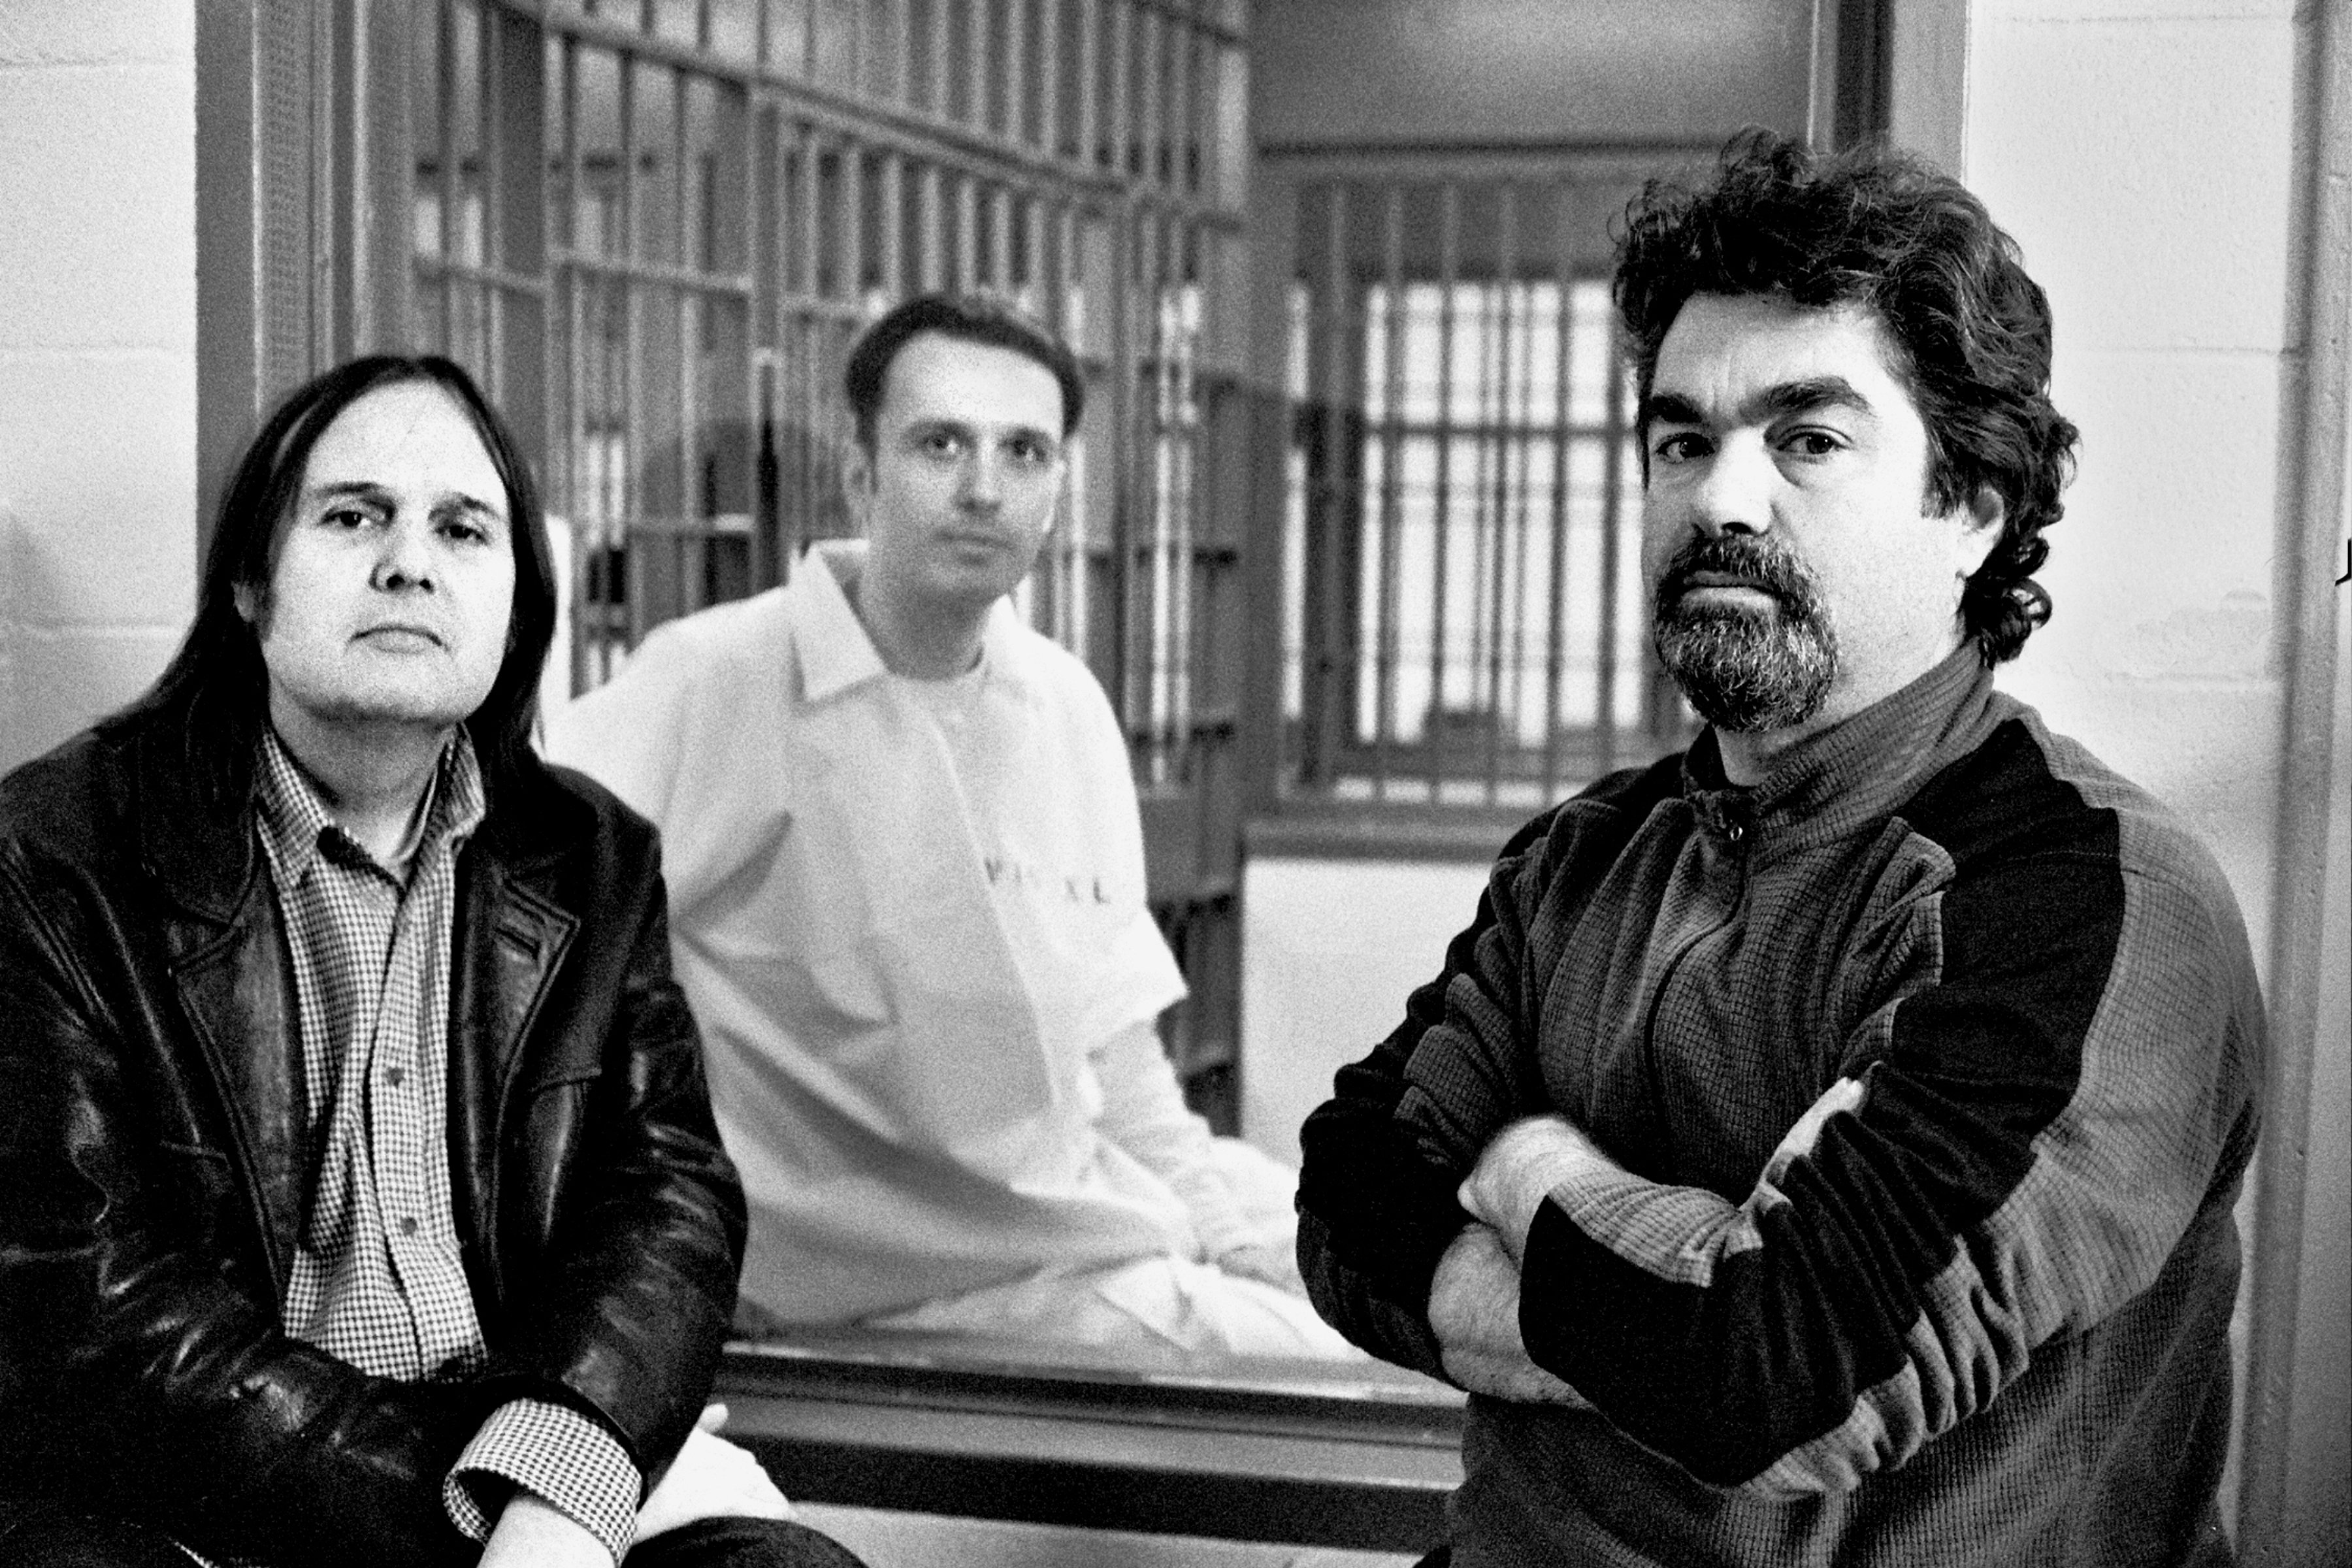 Filmmakers Joe Berlinger (right) and Bruce Sinofsky (left) with West Memphis Three member Damien Echols on death row in 2009 during the filming of Paradise Lost 3: Purgatory.